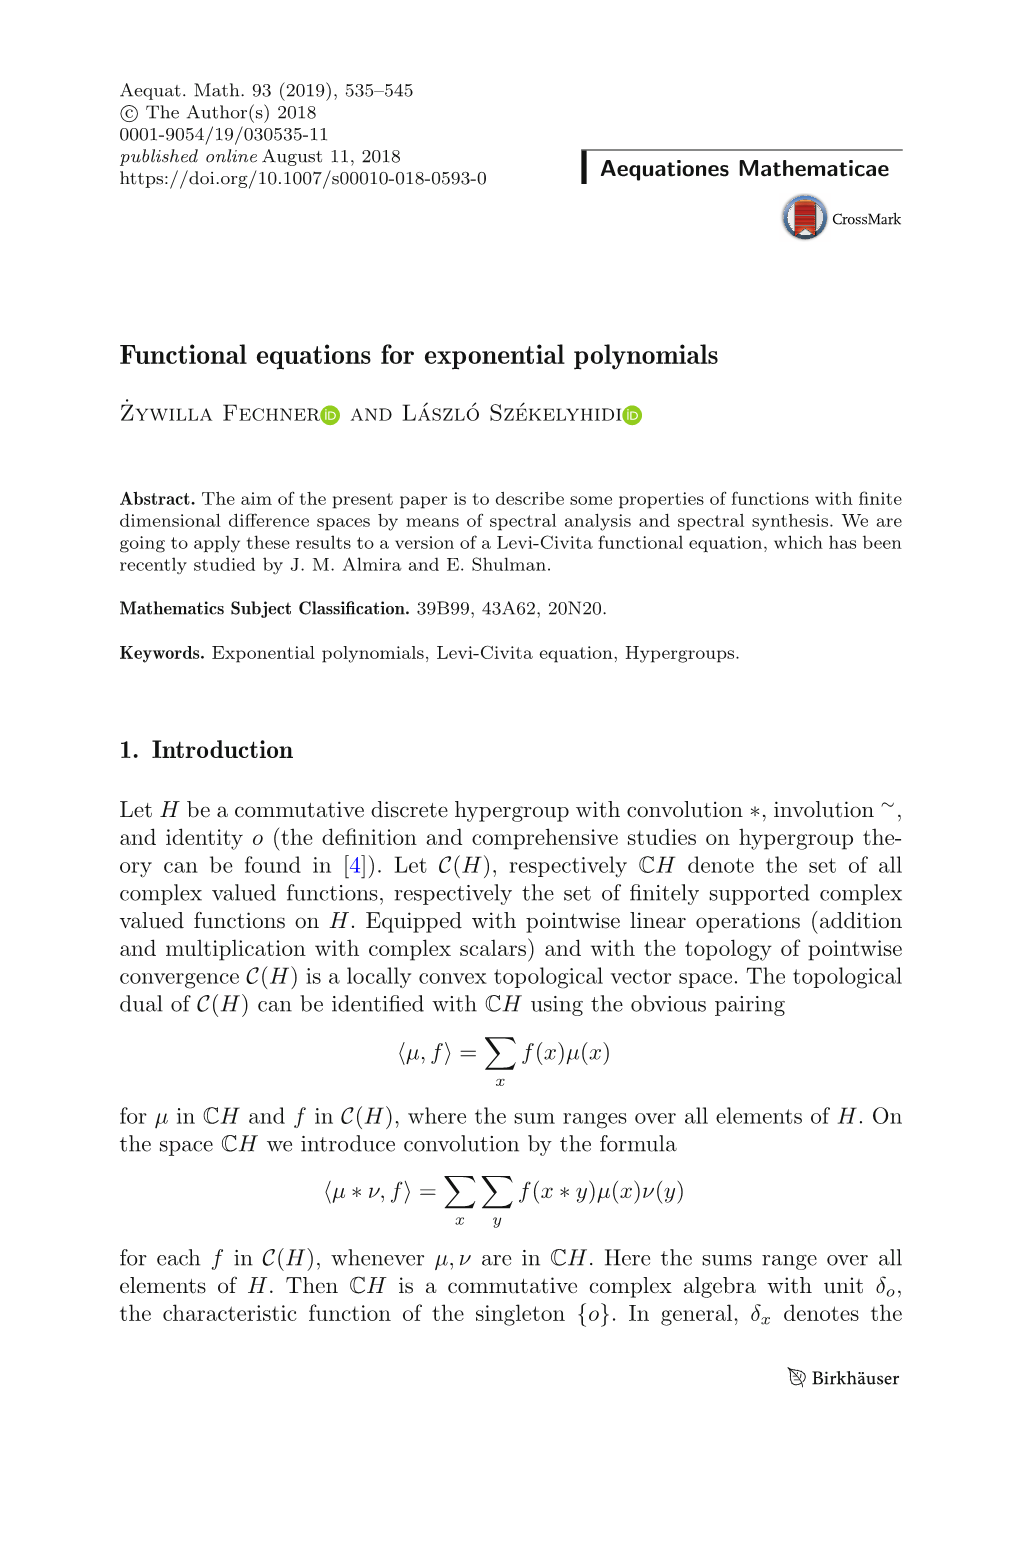 Functional Equations for Exponential Polynomials